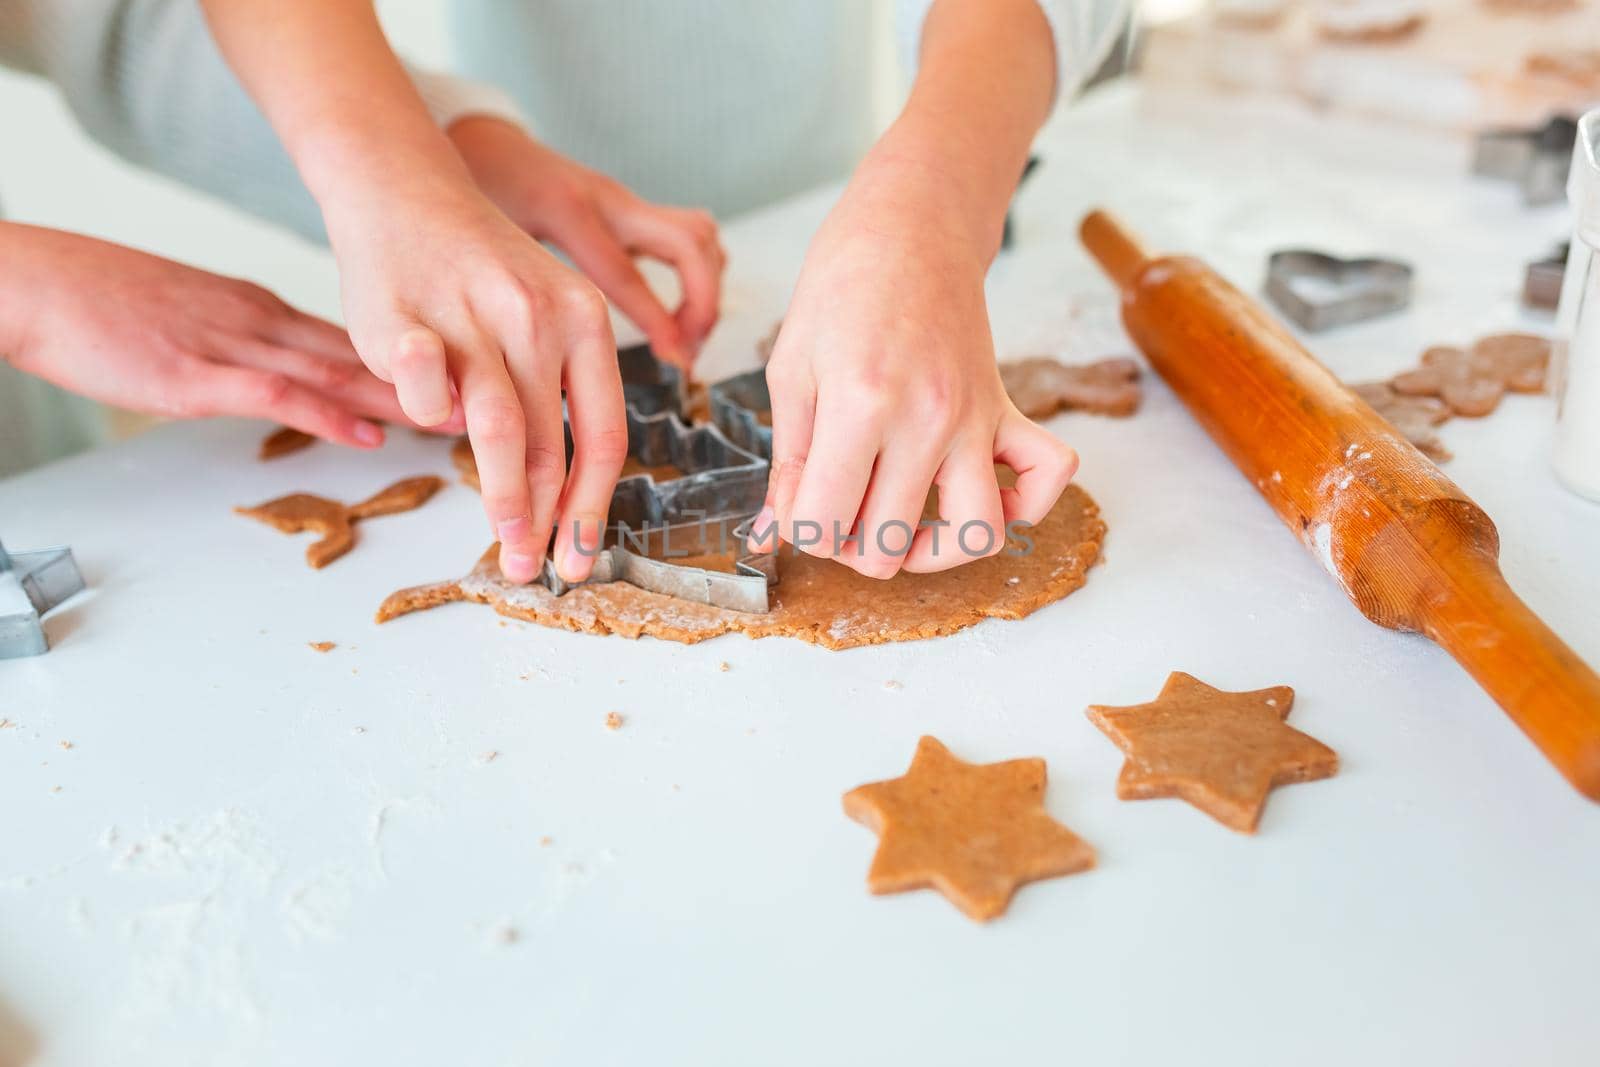 Kid's hands making gingerbread, cutting cookies of gingerbread dough. Christmas bakery. Friends making gingerbread view from above. Festive food, cooking process, family culinary, Christmas and New Year traditions concept